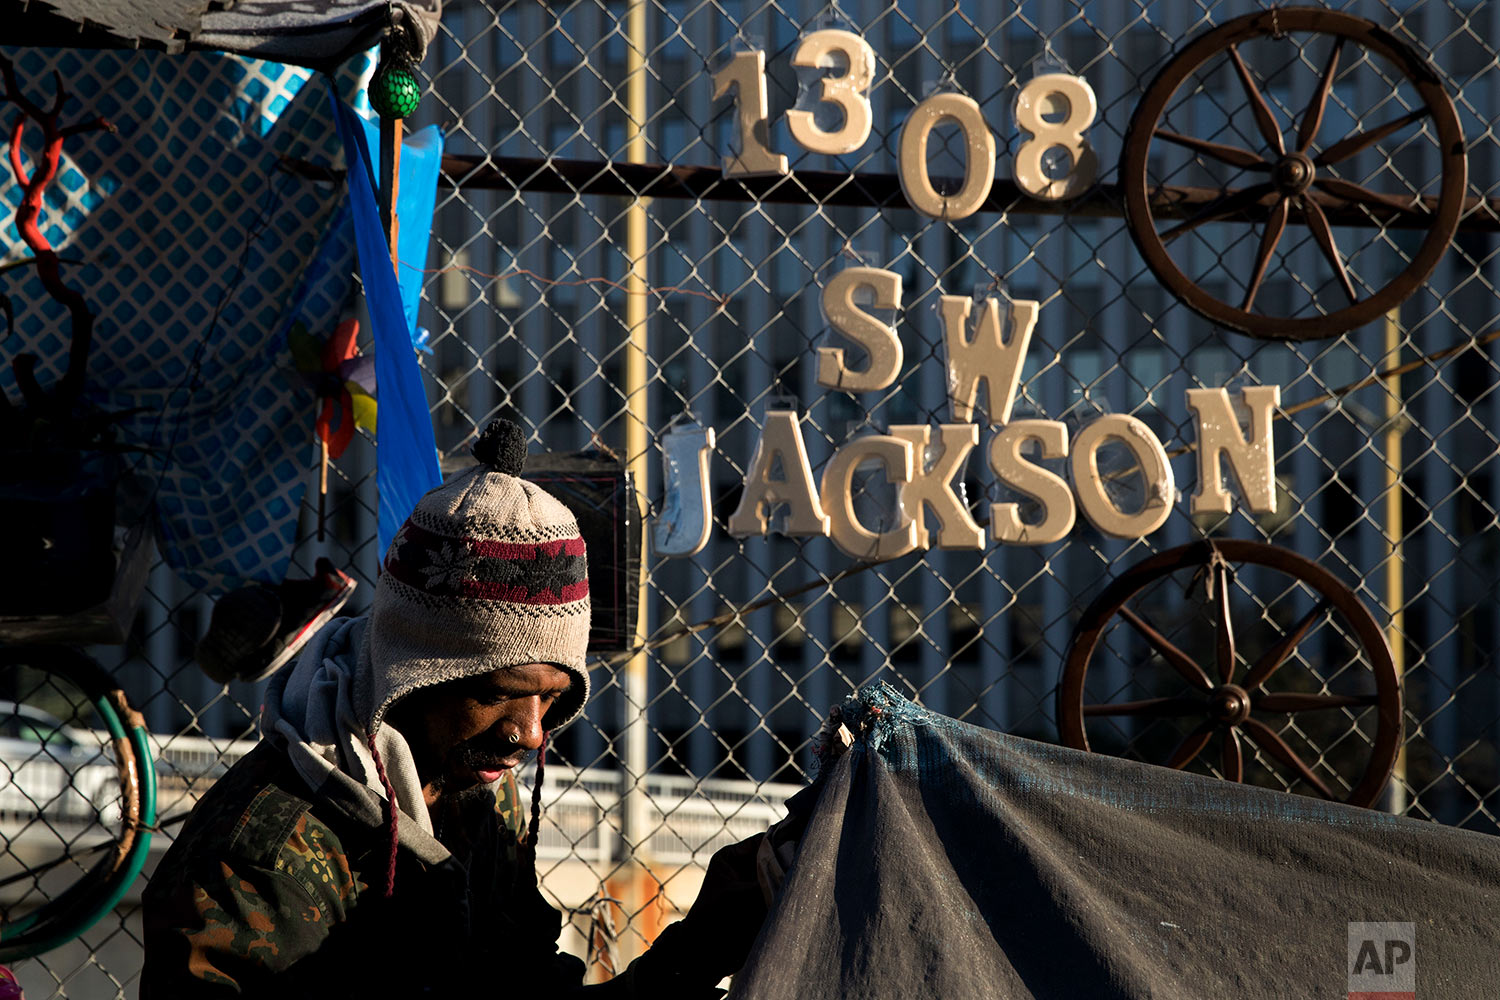  Thaddeus Bell, 50, who is homeless, sits outside his tent with the street address of his childhood home in Oklahoma hanging on a fence Monday, Dec. 4, 2017, in Los Angeles. "I might be homeless but I'm human just like everybody else," said Bell. "I 